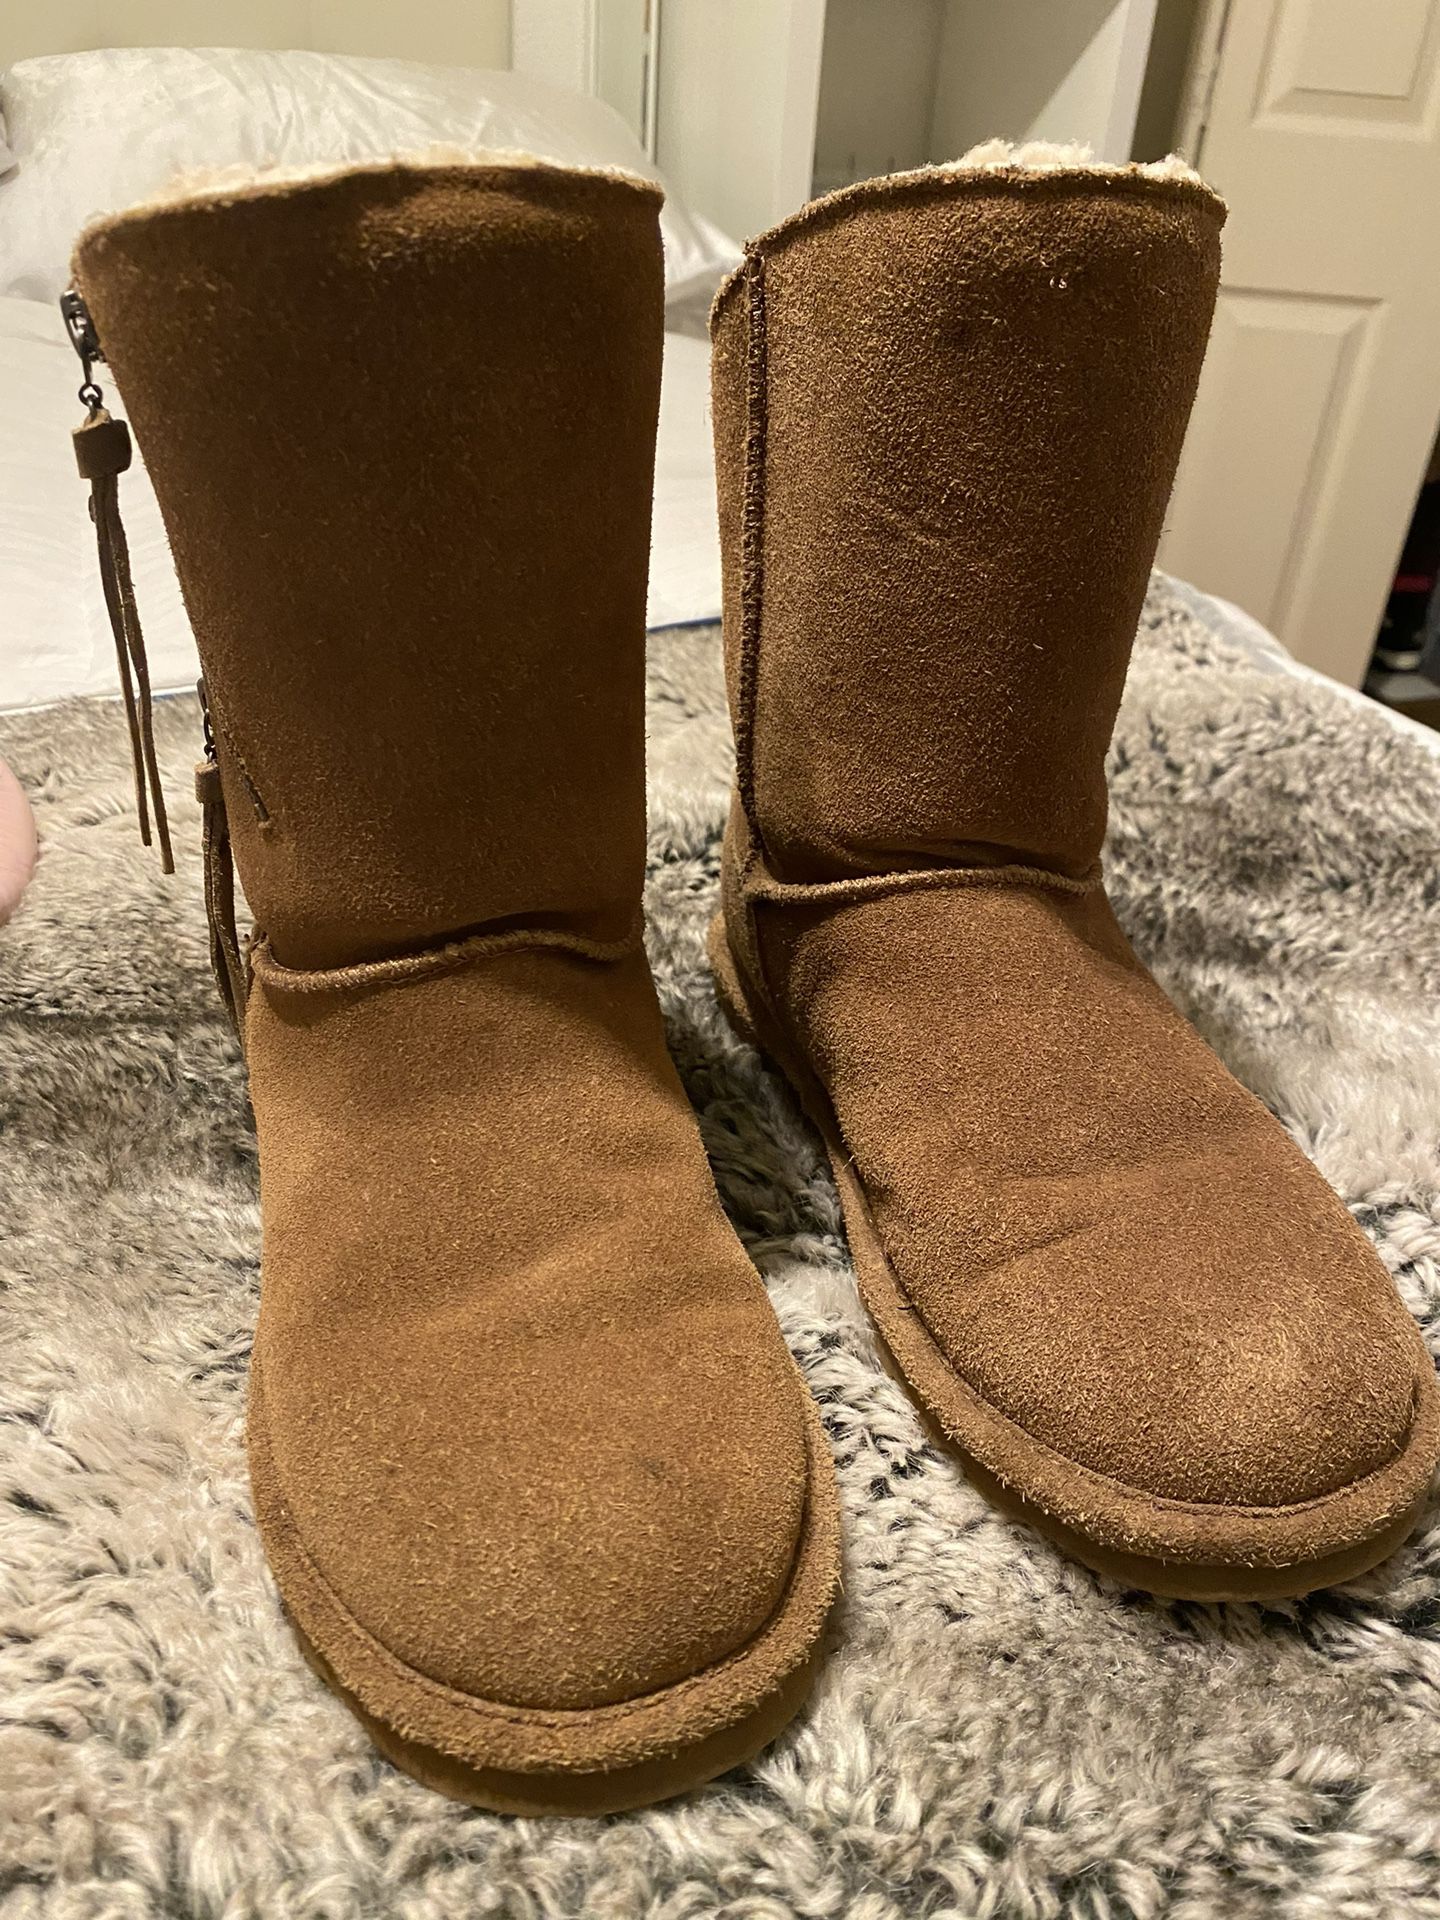 Bear Paw Suede Boots size 8